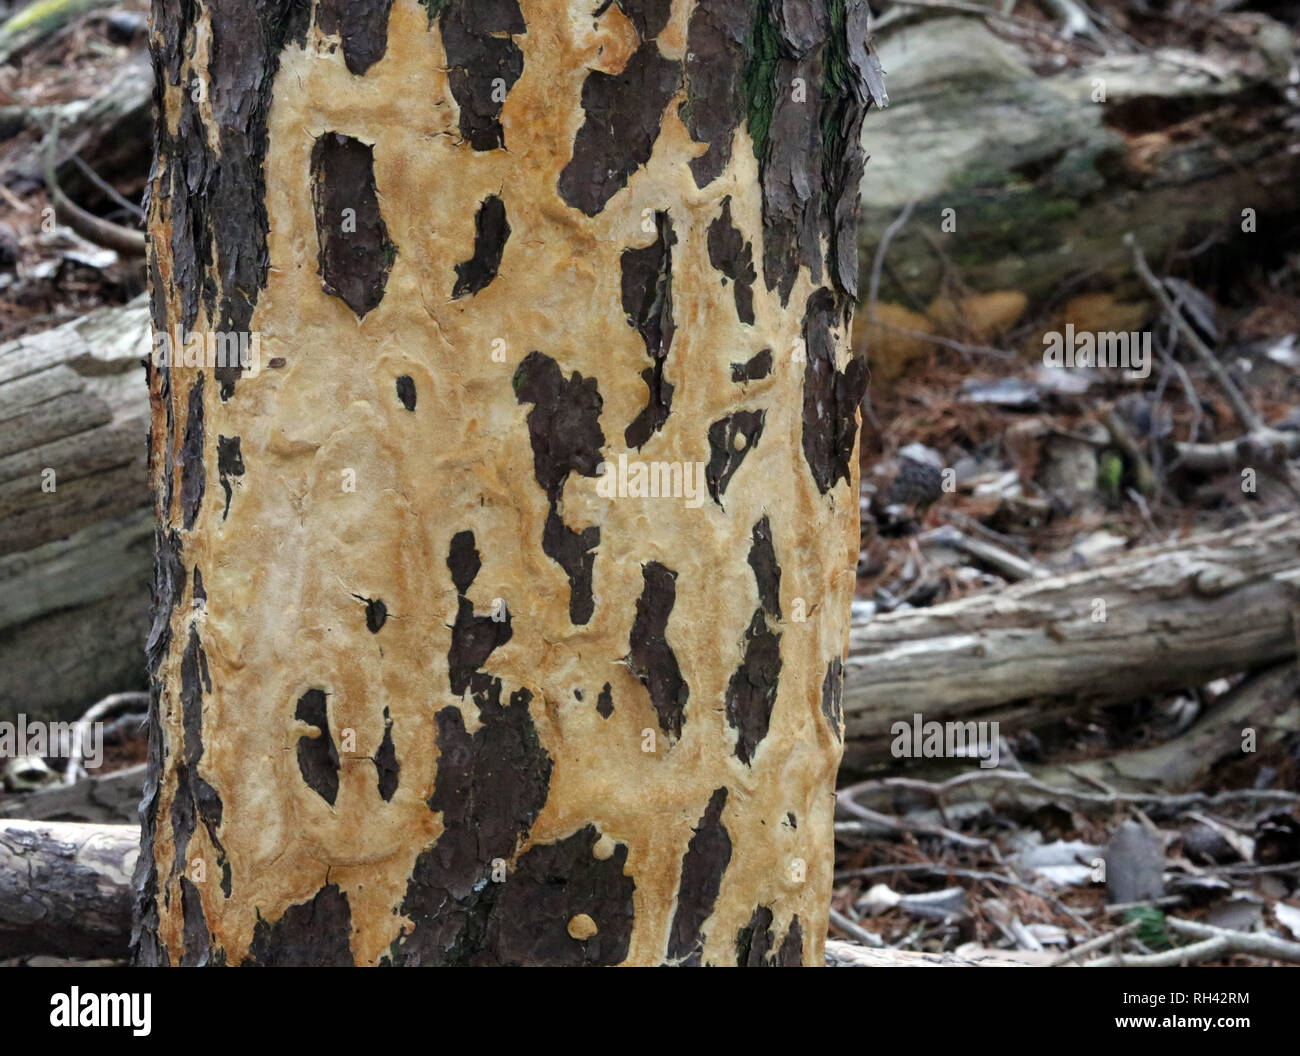 detail of pine bark with covering fungi Stock Photo